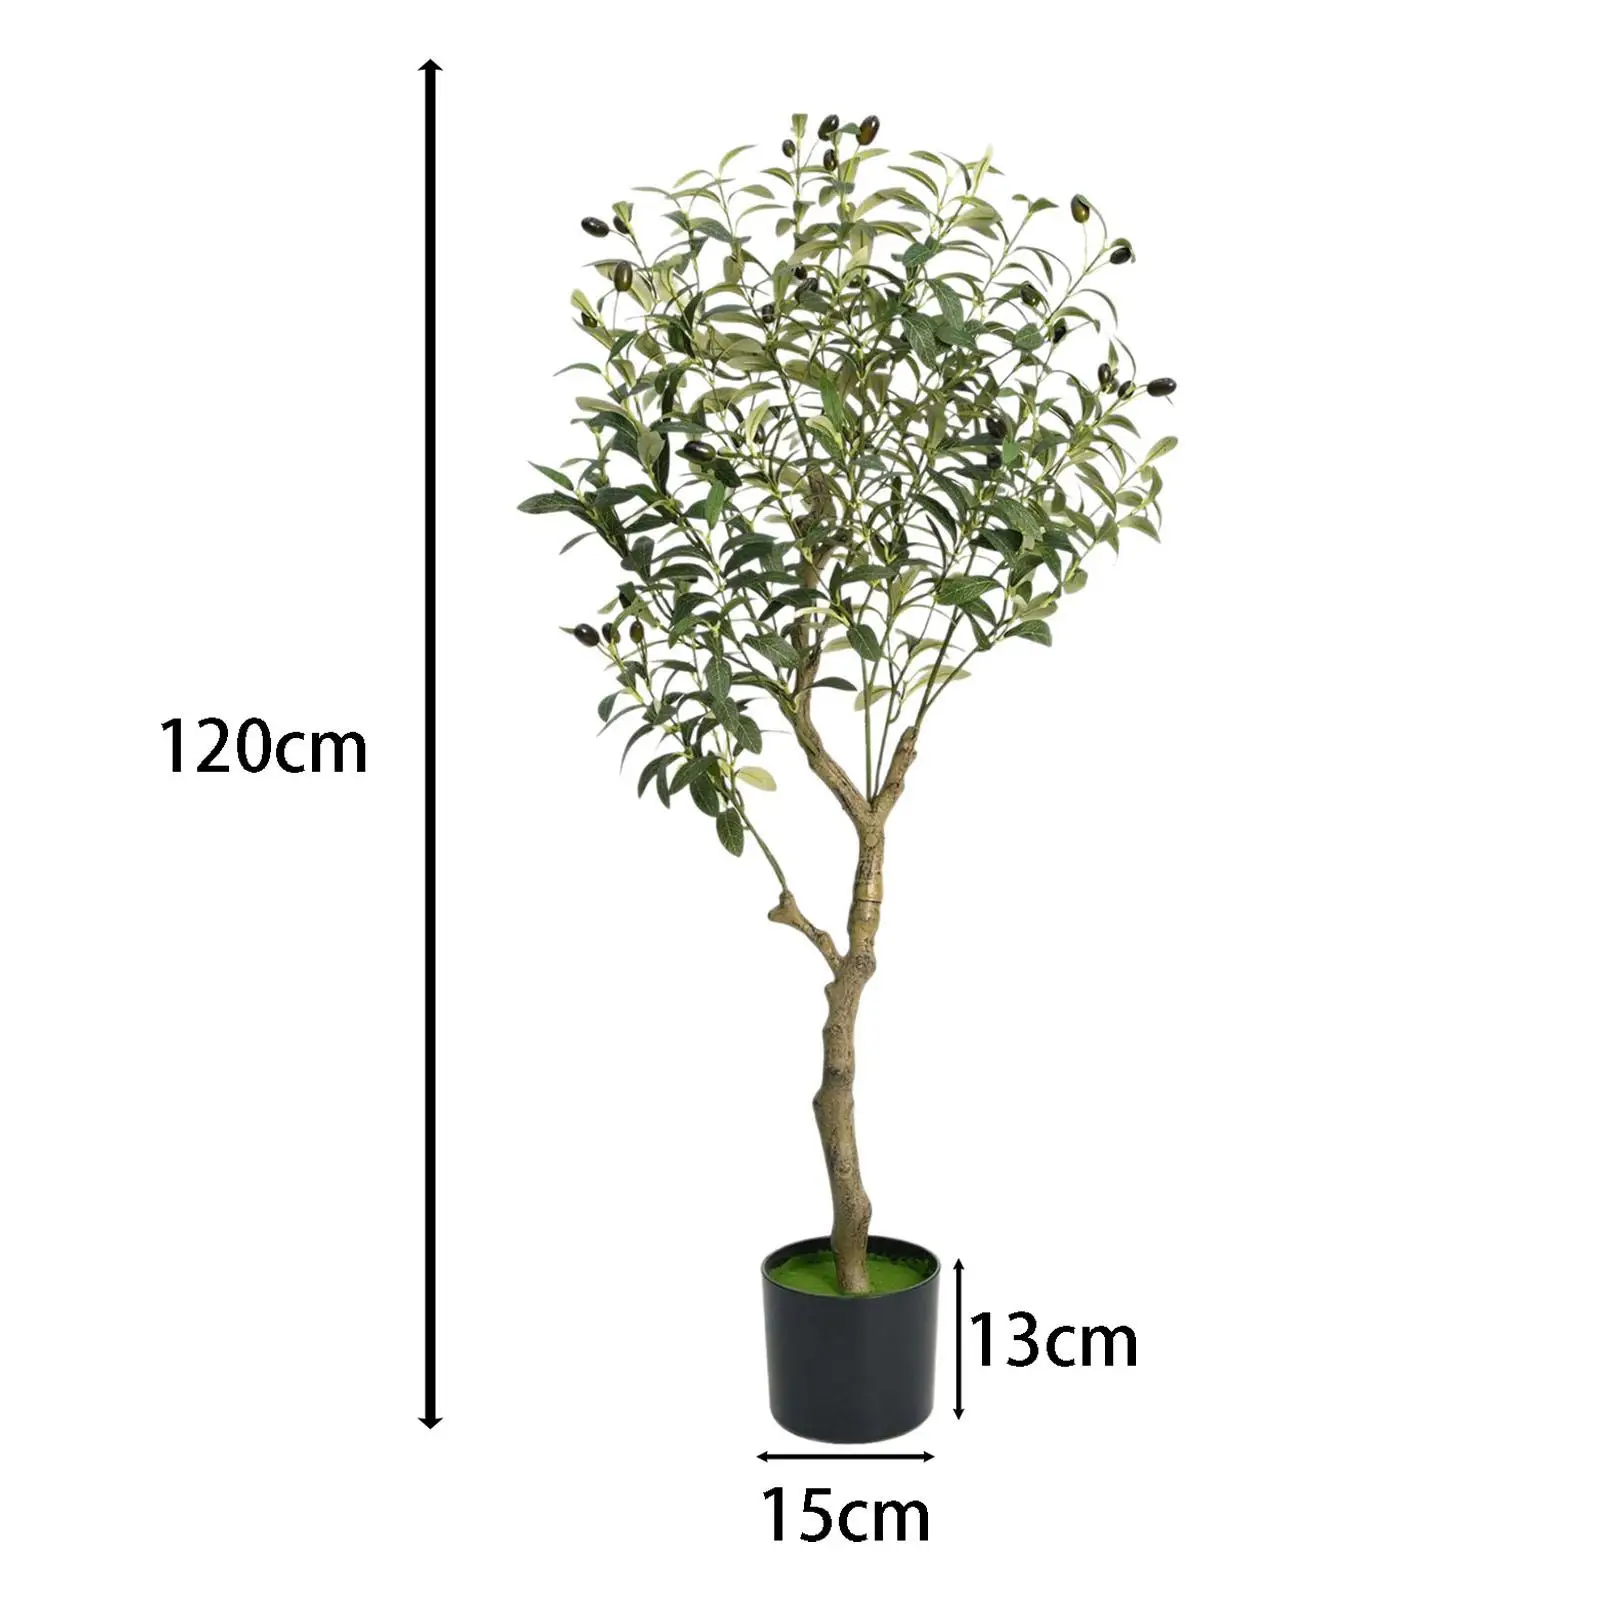 Artificial Olive Tree Faux Olive Tree with Planter Housewarming Gift,House Greenery Decoration 4 ft for Garden Office Indoor